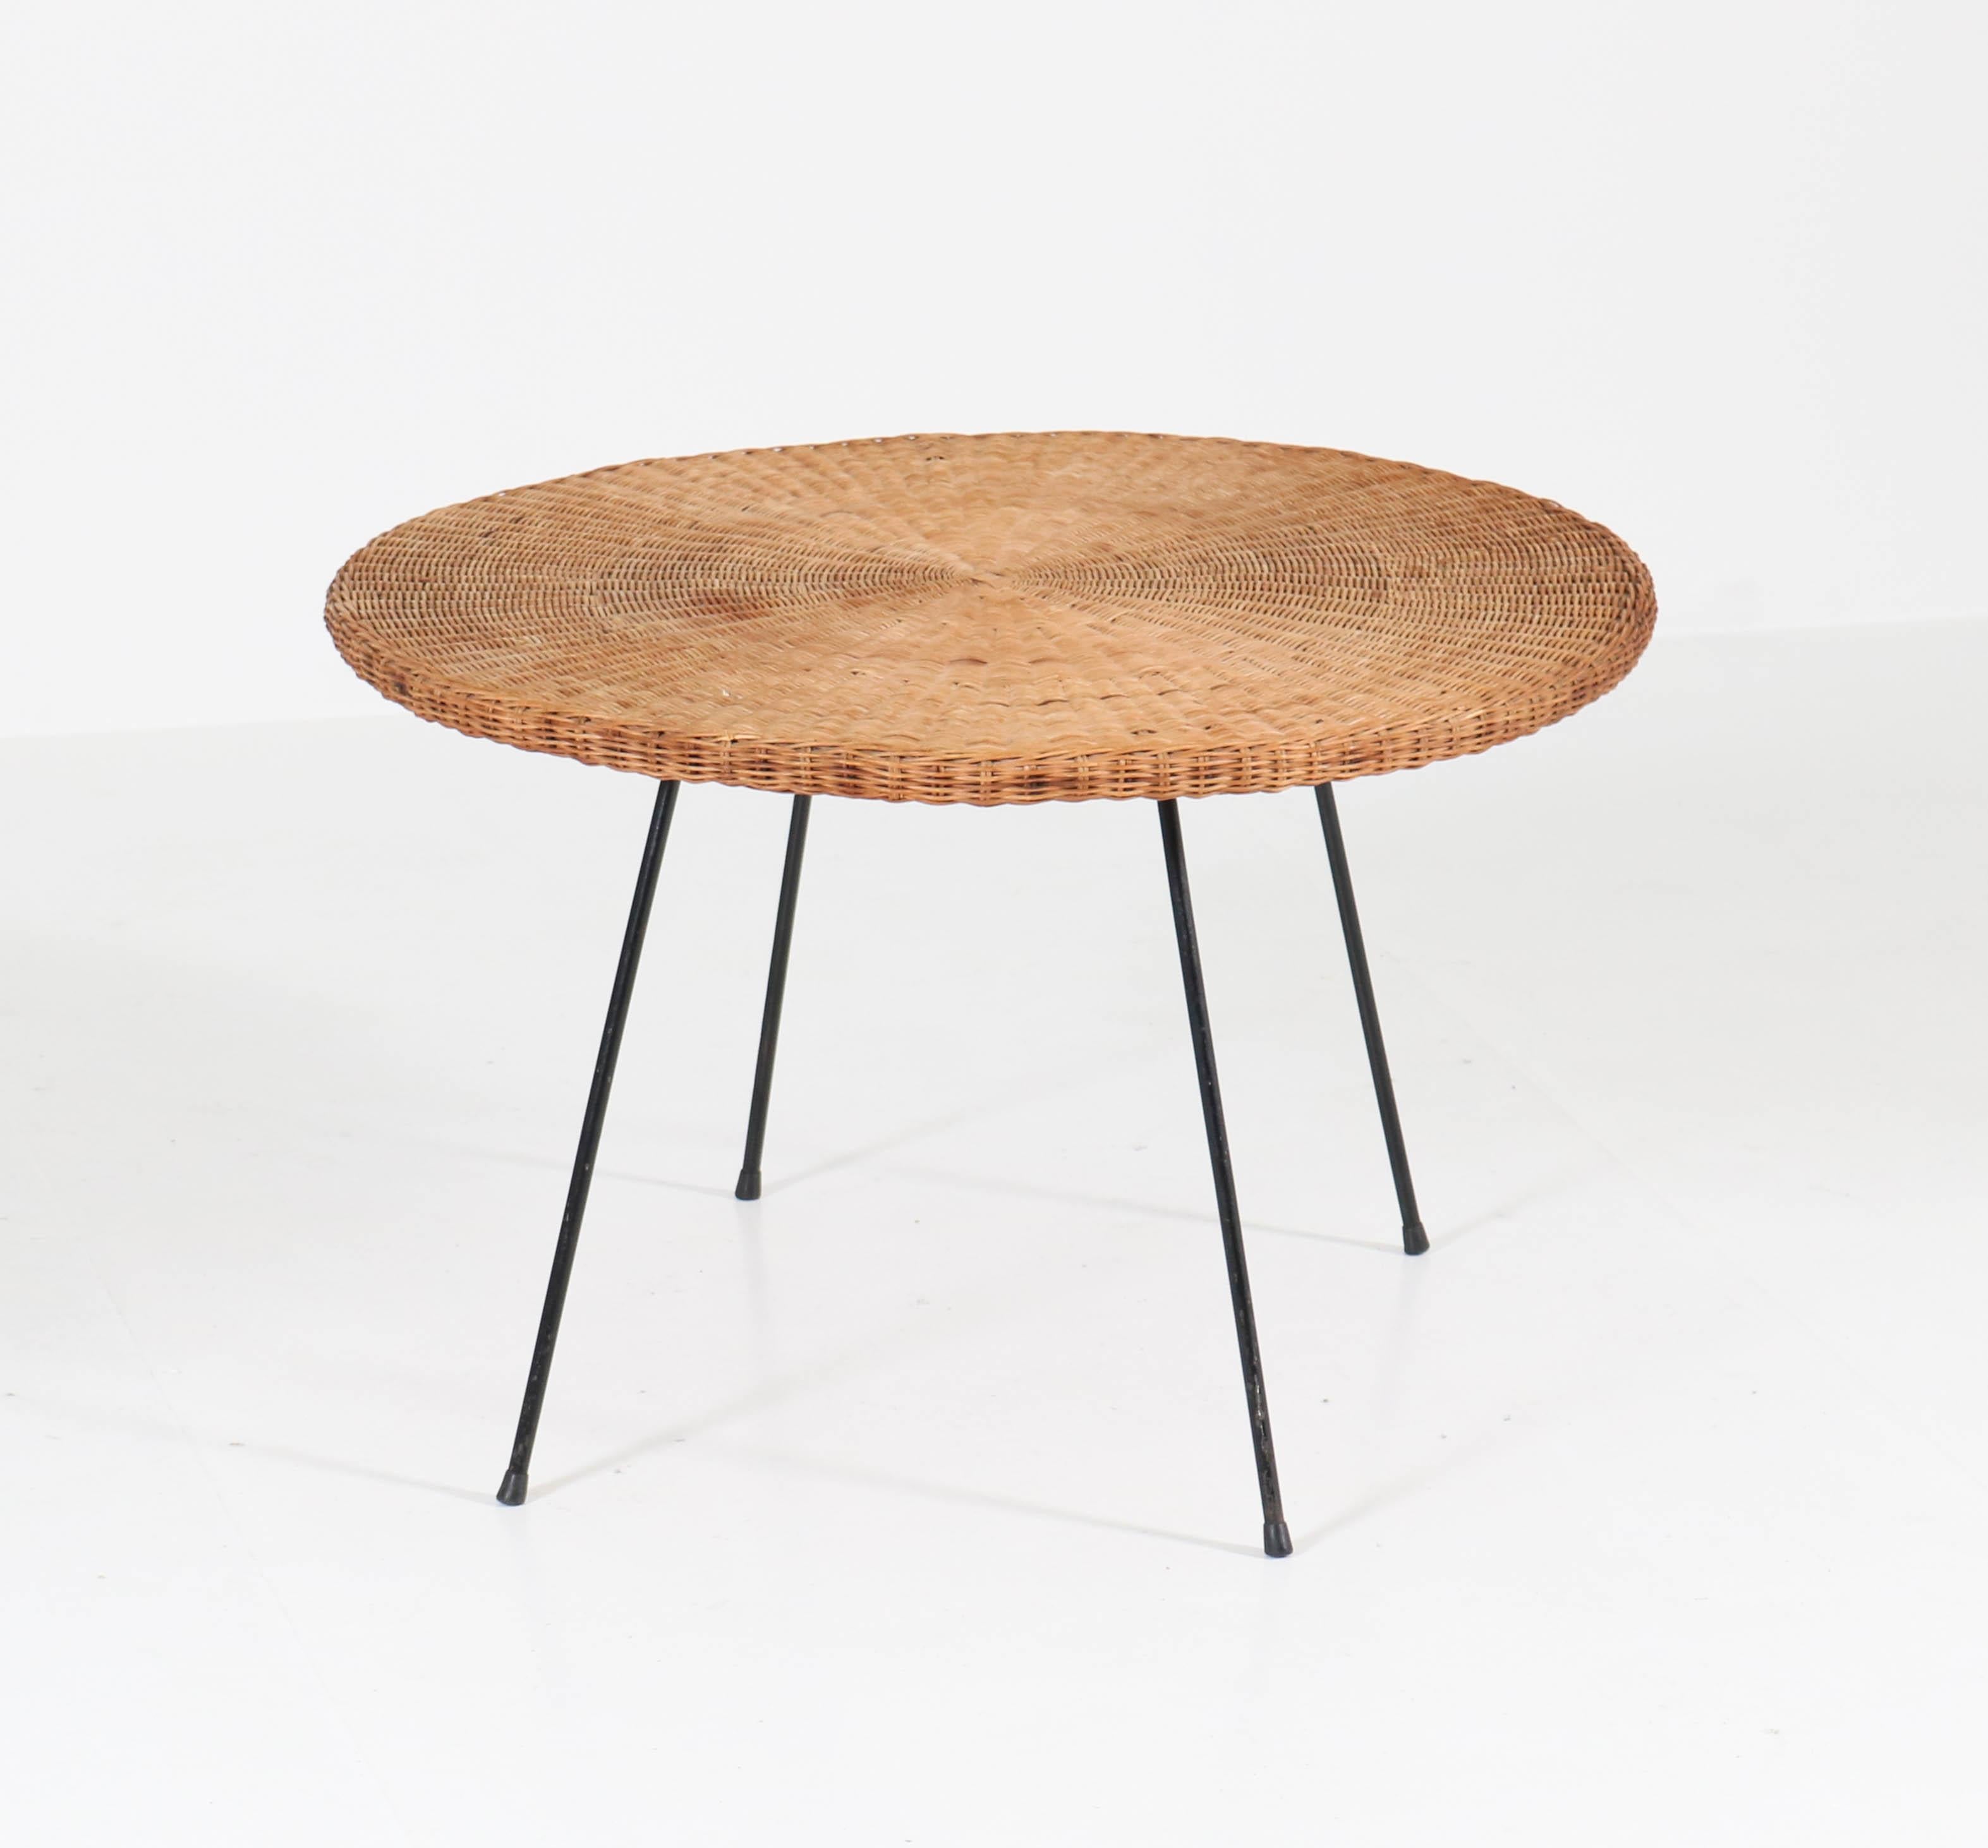 Lacquered French Mid-Century Modern Matégot Style Coffee Table with Wicker Top, 1950s